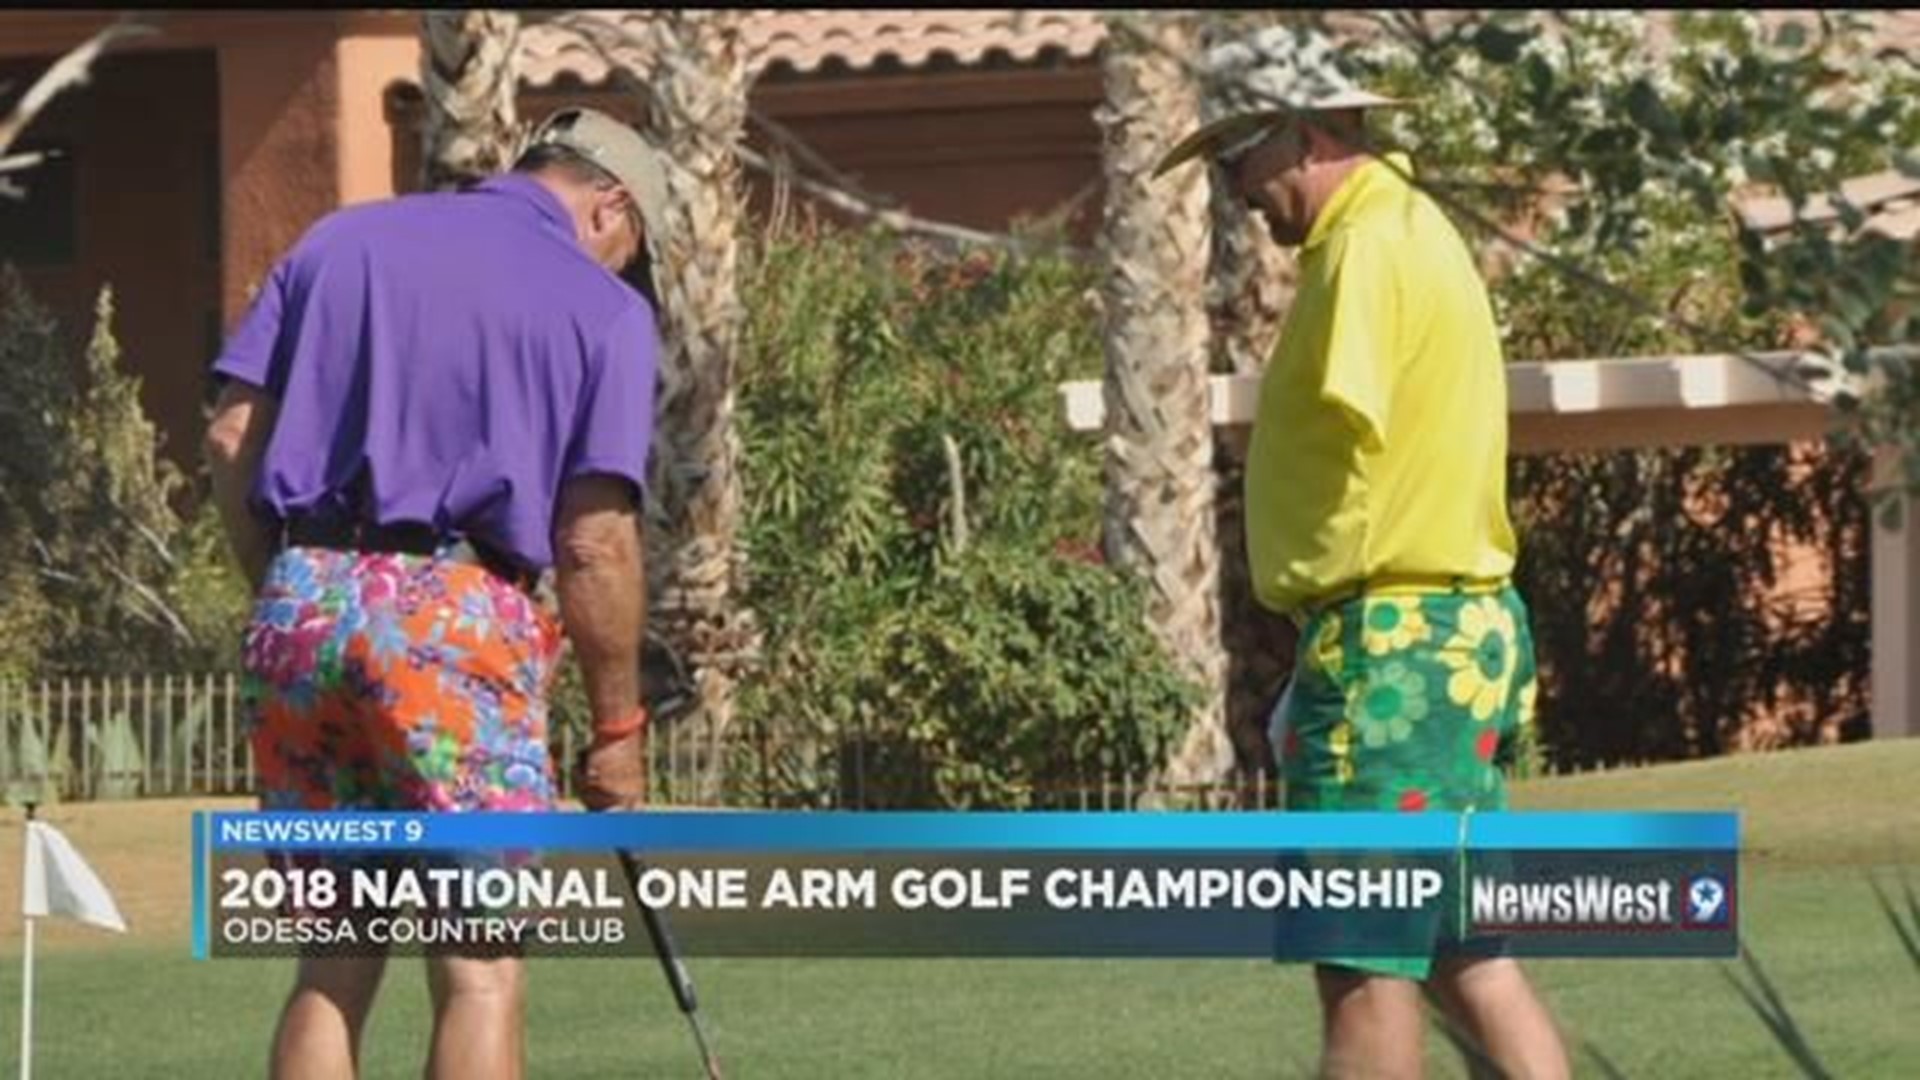 West Texas native brings the 2018 National One Arm Golf Championship to Odessa